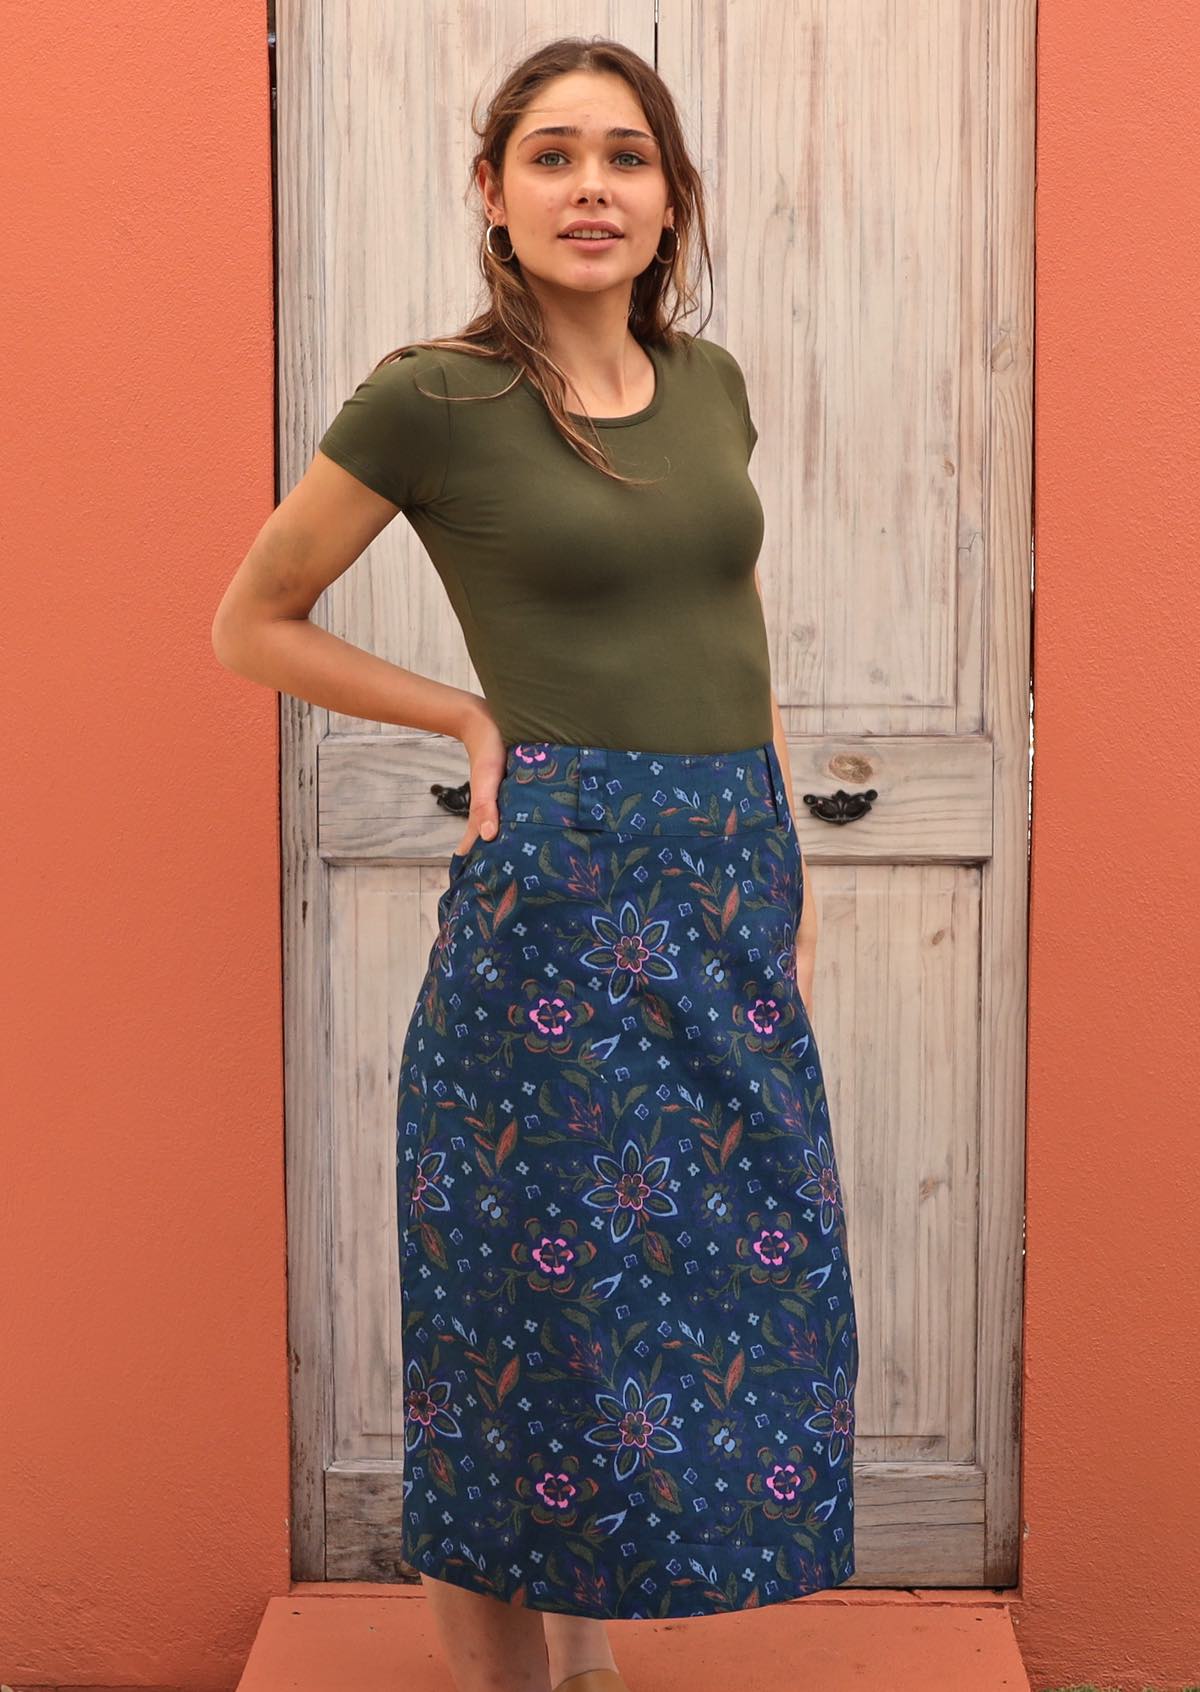 Model pairs cotton skirt with a green top to complement the orange, green and pink colour of the floral print. 